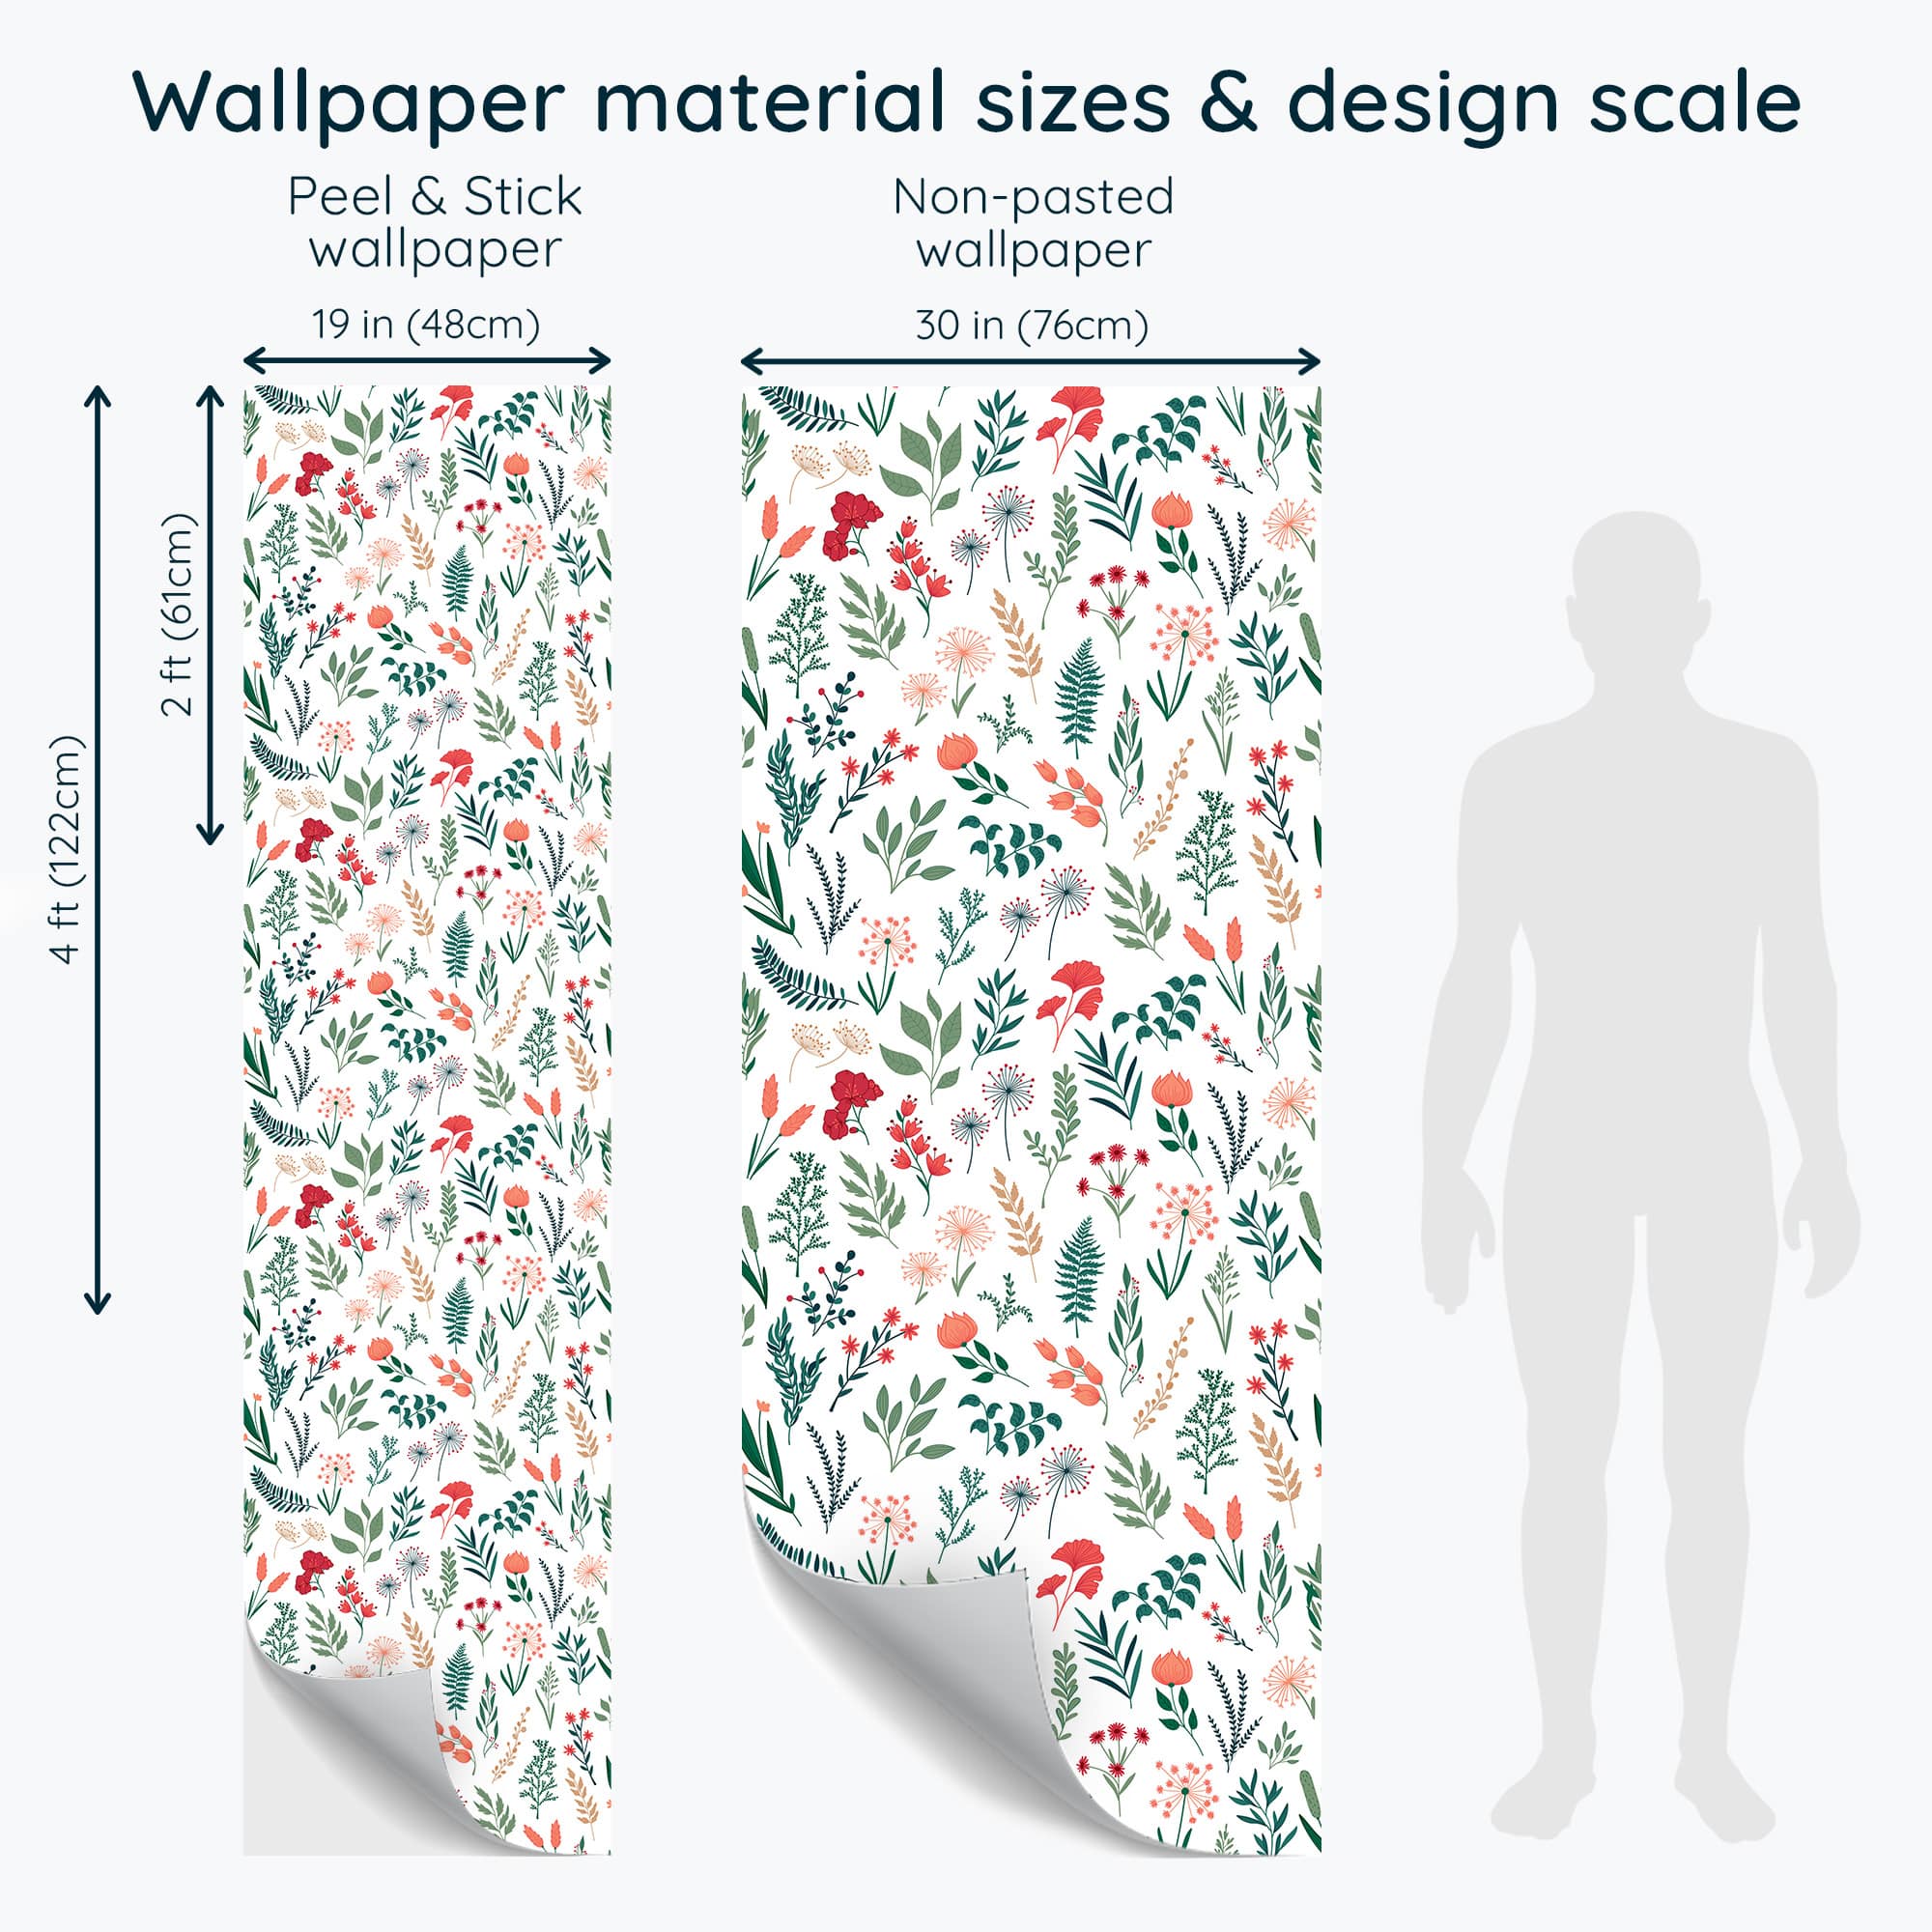 Non-pasted and Peel and stick Seamless scandinavian floral design and pattern preview